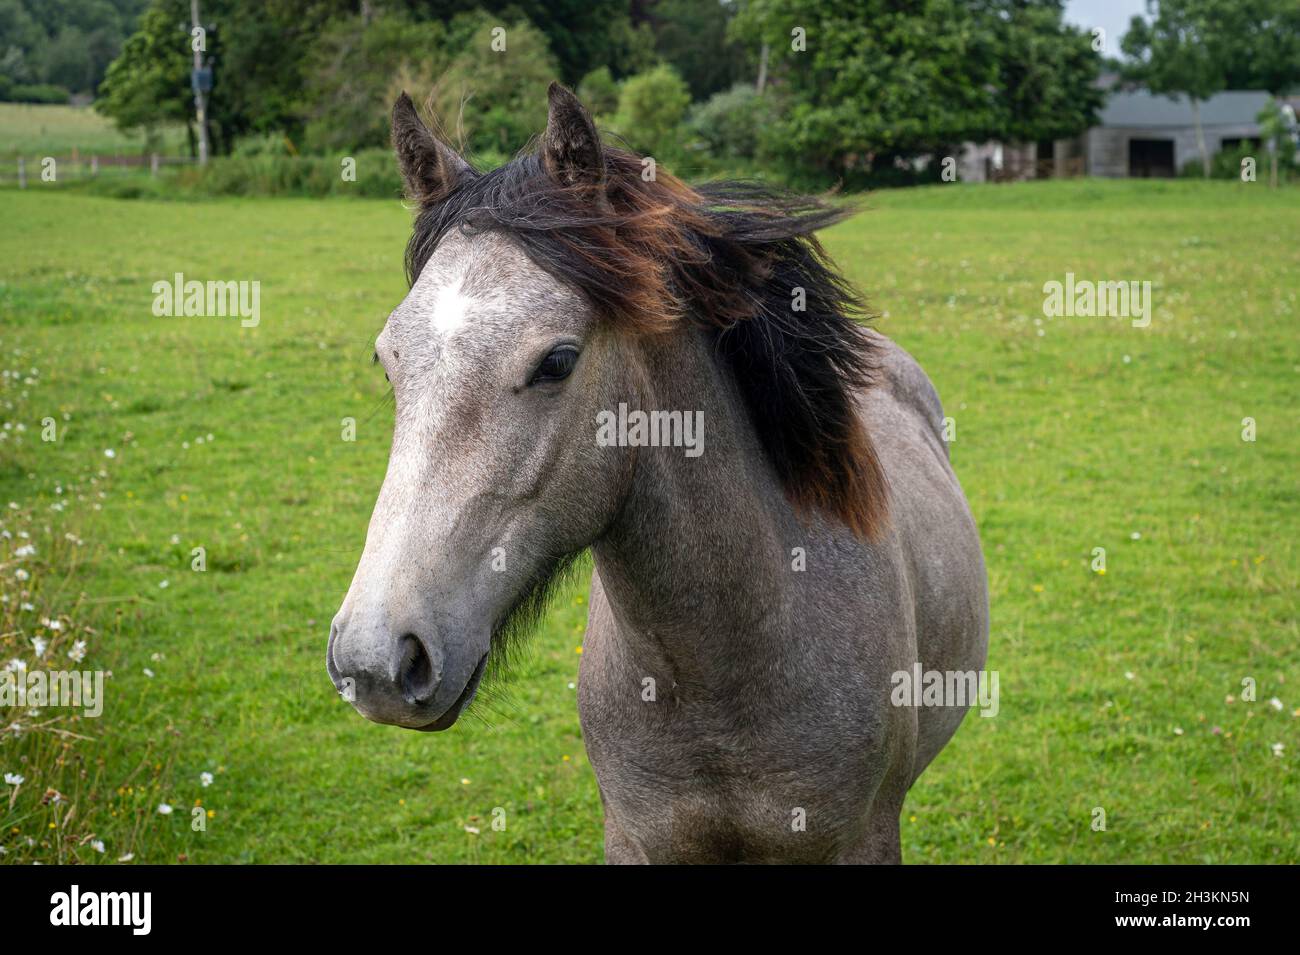 Portrait of a young horse in a field Stock Photo